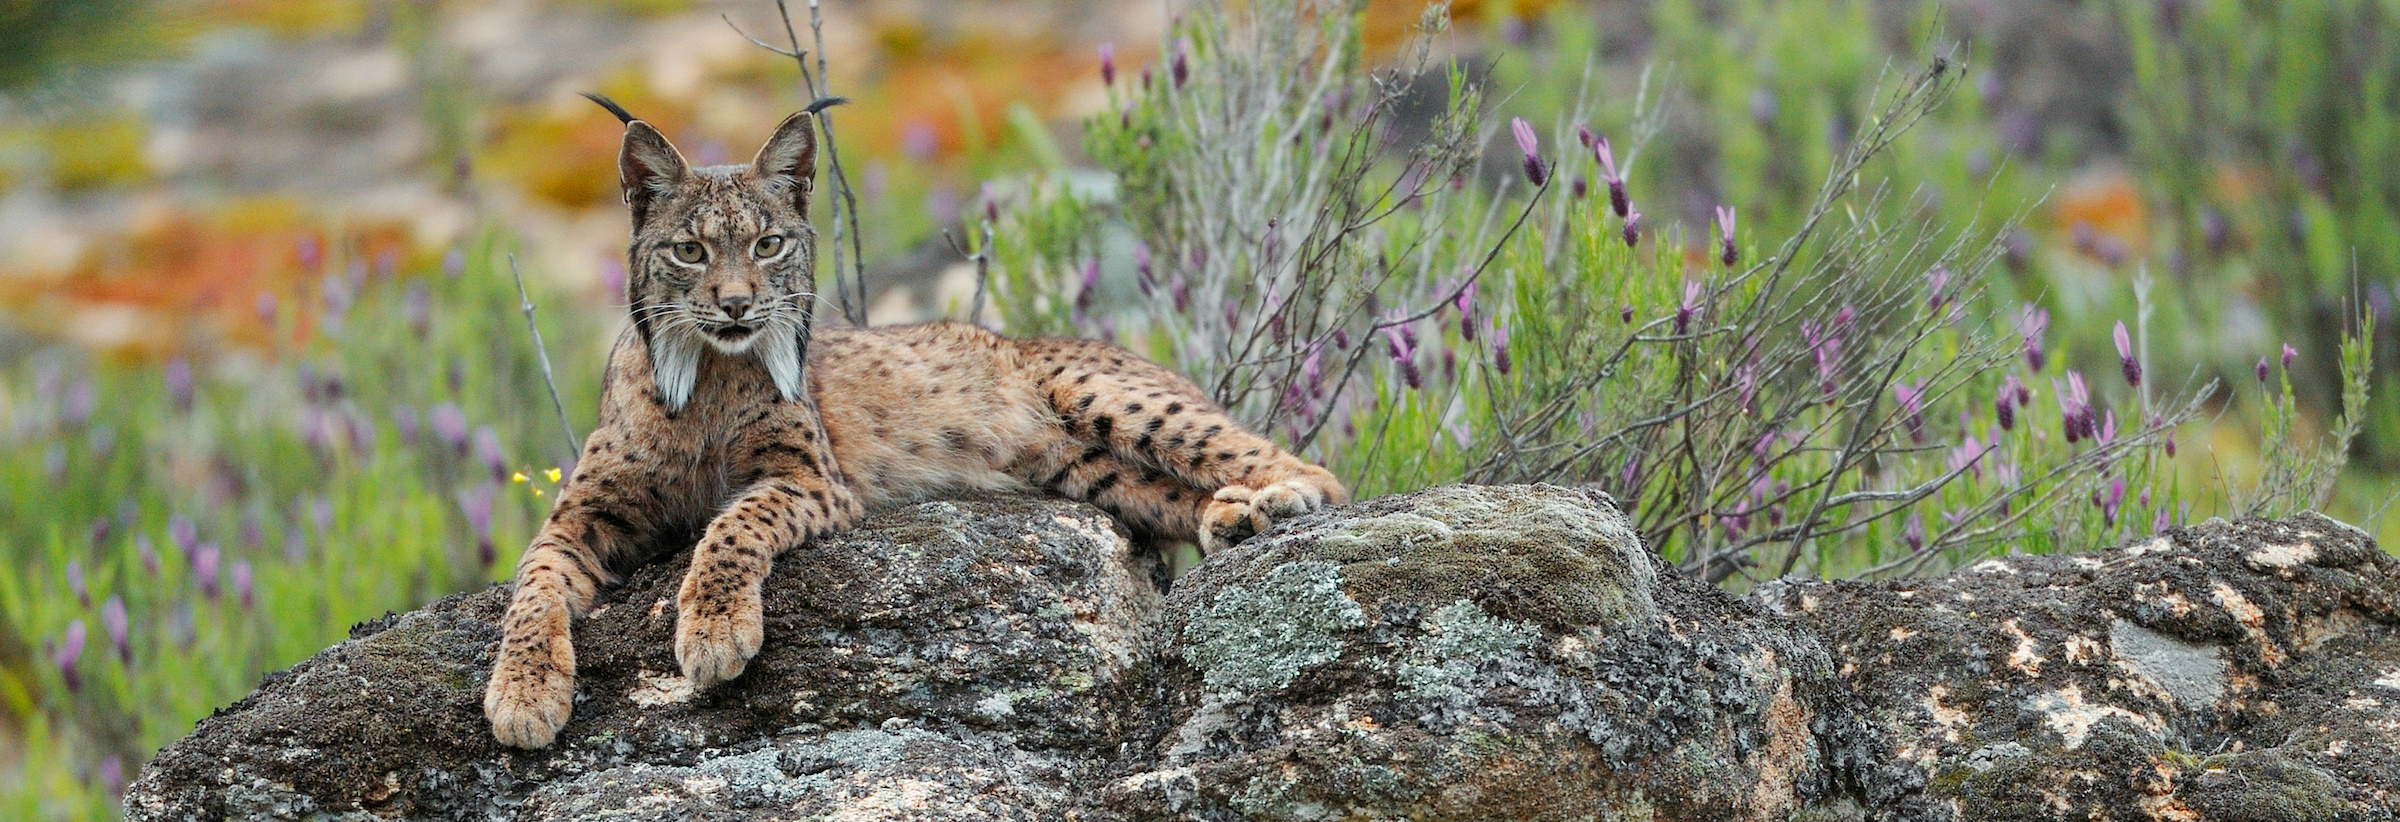 Wildlife in the Côa Valley is already making a comeback. An Iberian lynx (pictured) was recently spotted here for the first time.